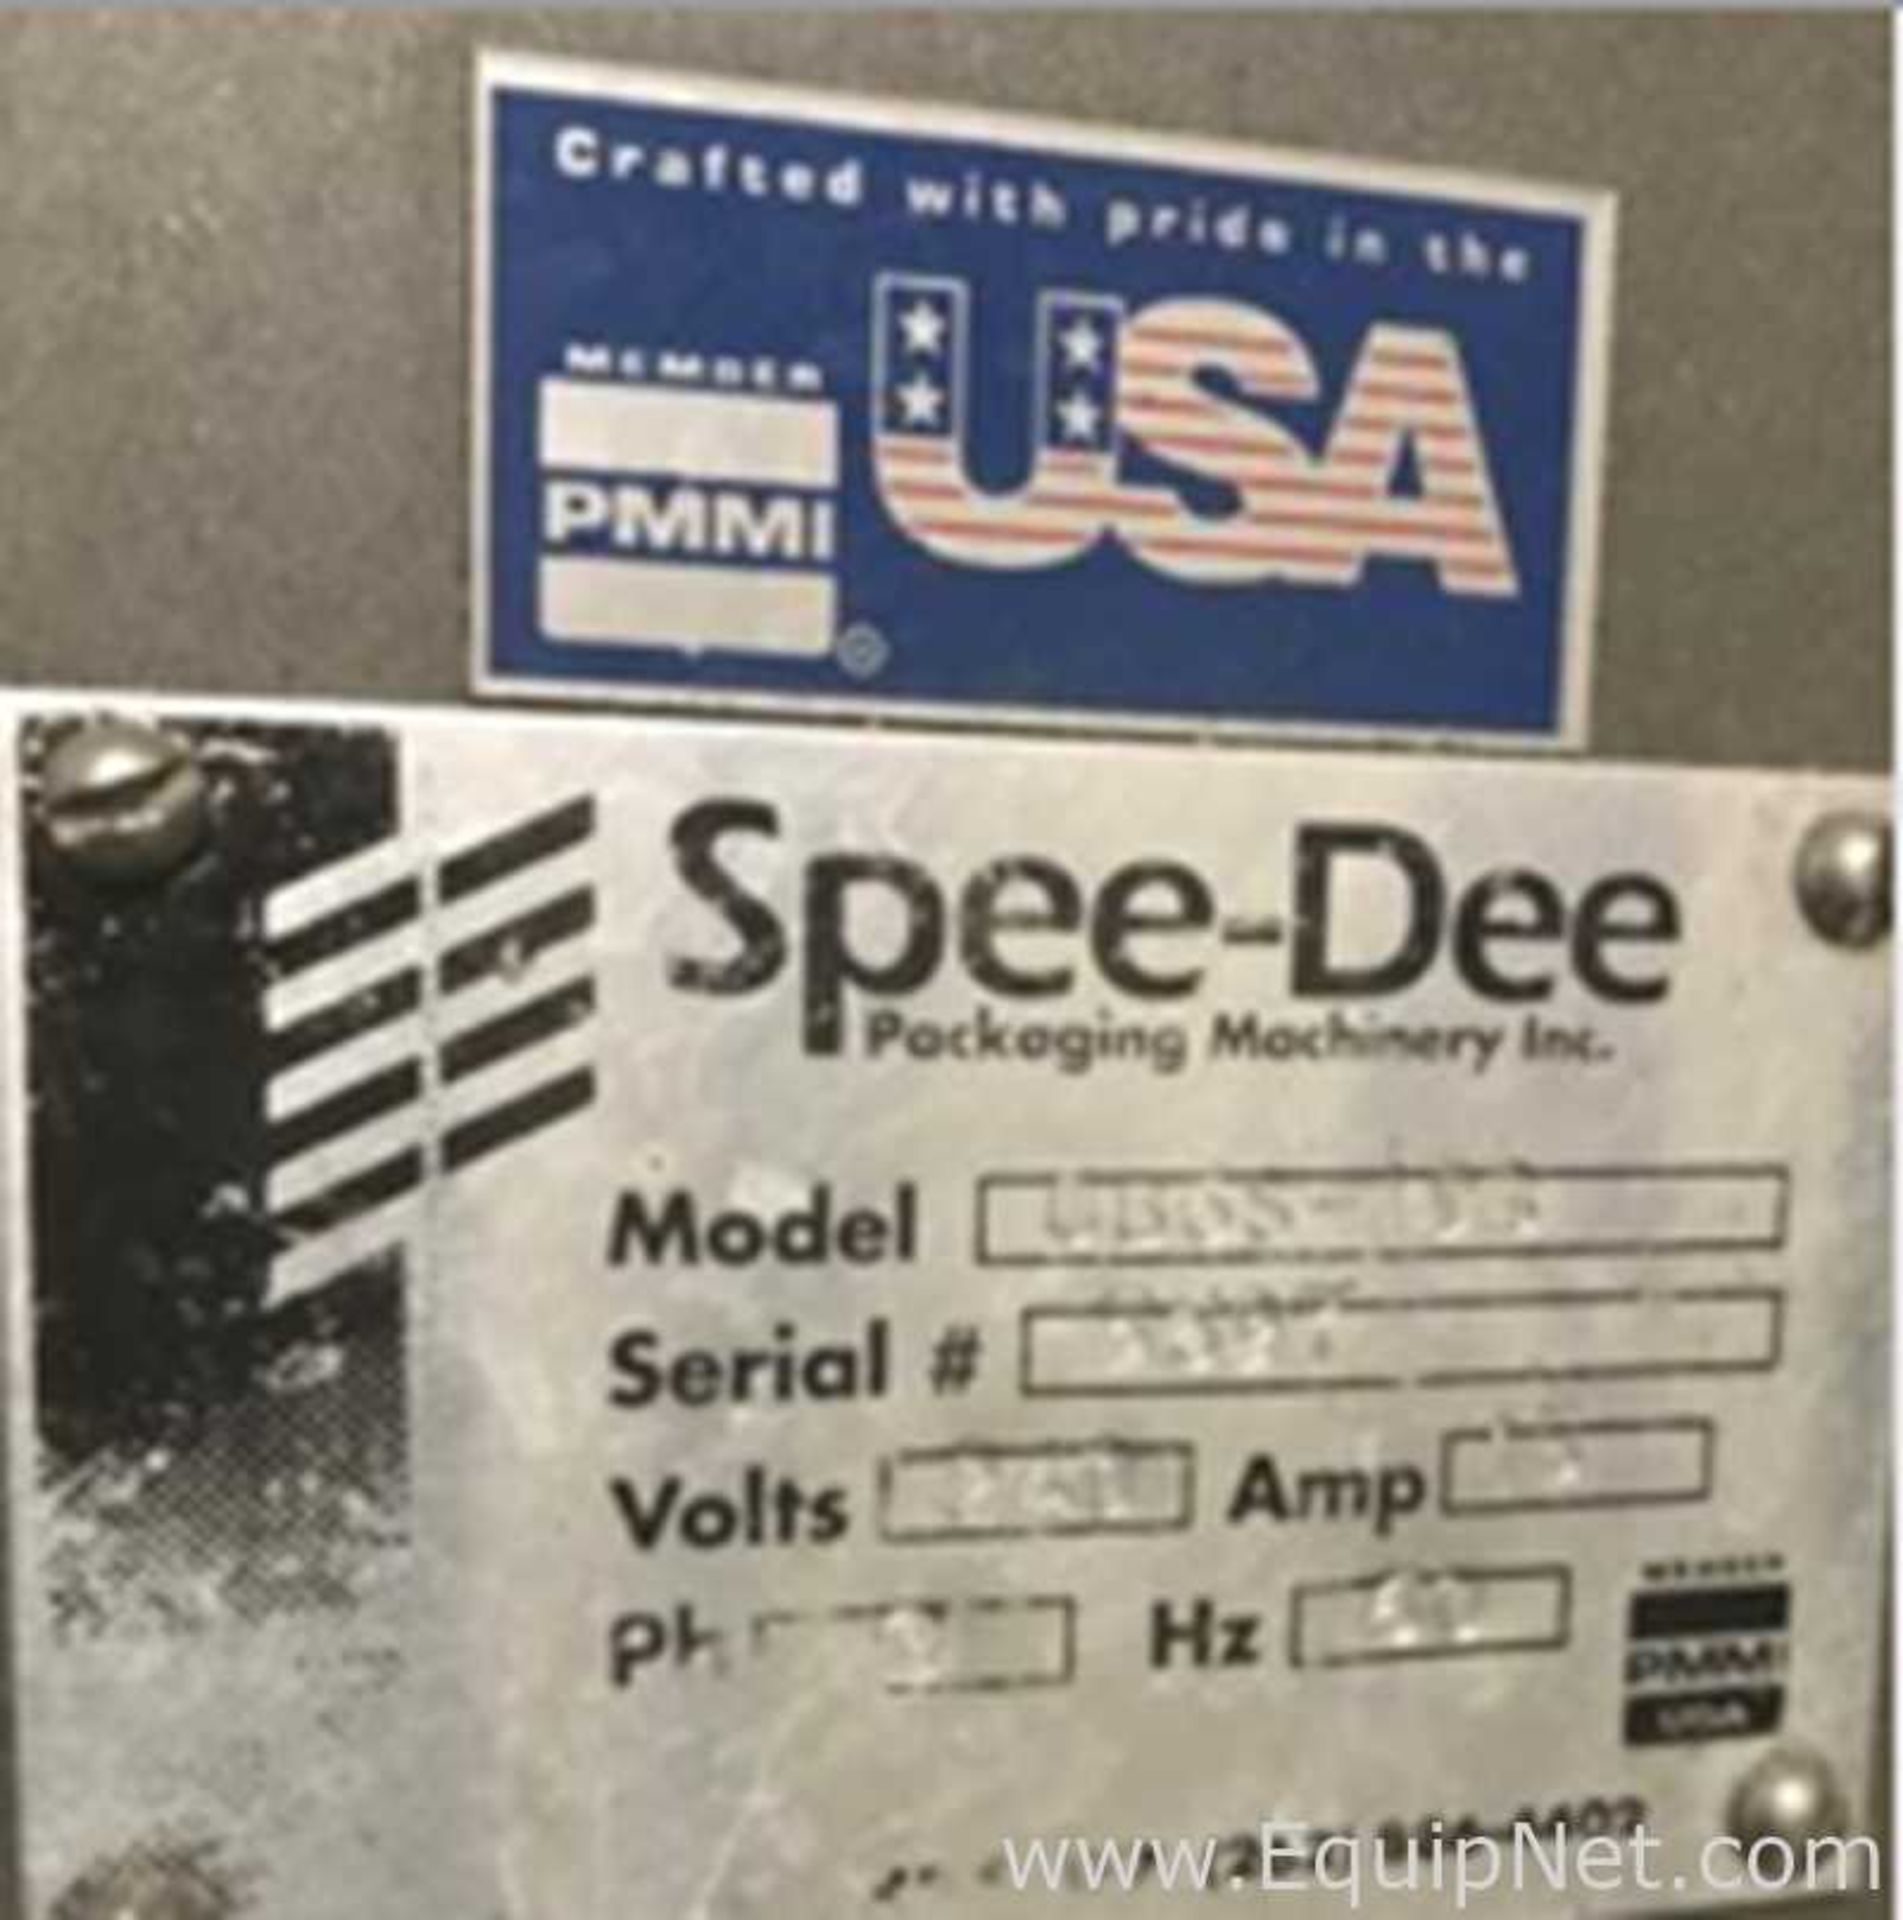 Spee-Dee CB6S-193 Rotary Cup Filler - Image 6 of 6